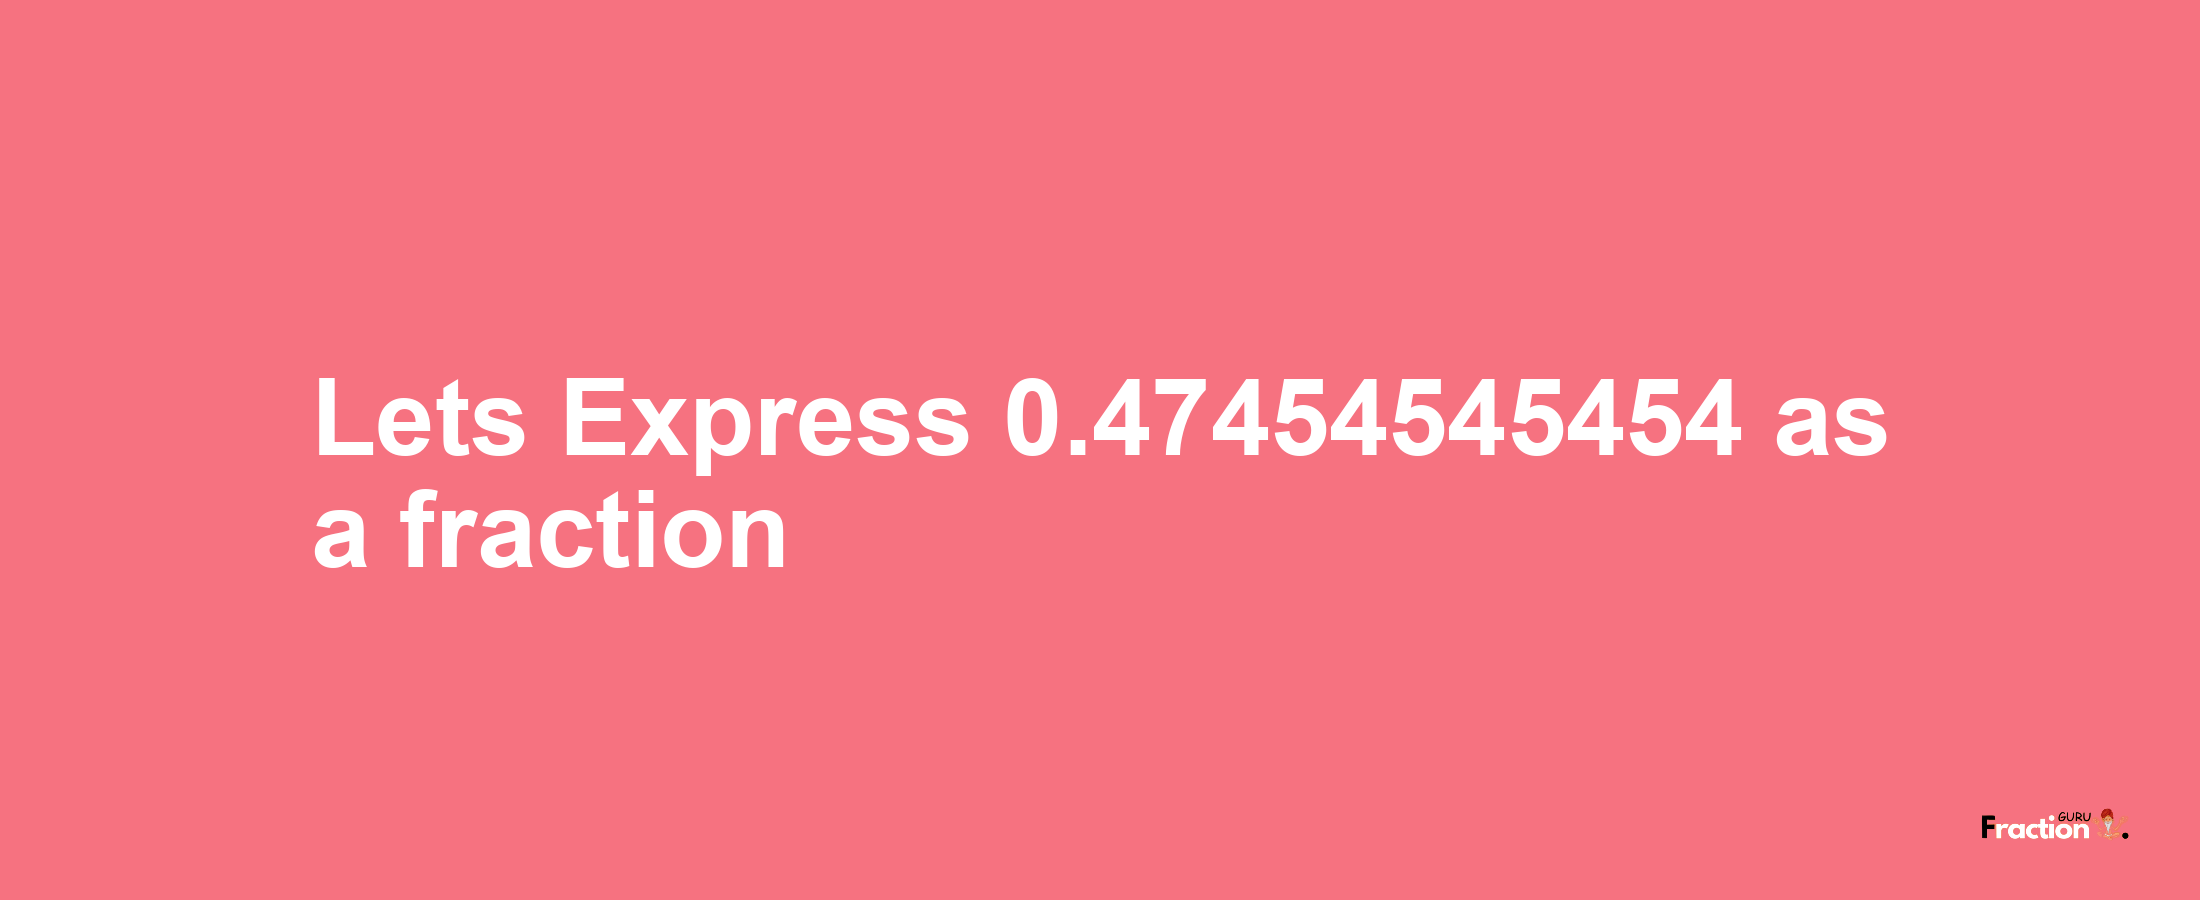 Lets Express 0.47454545454 as afraction